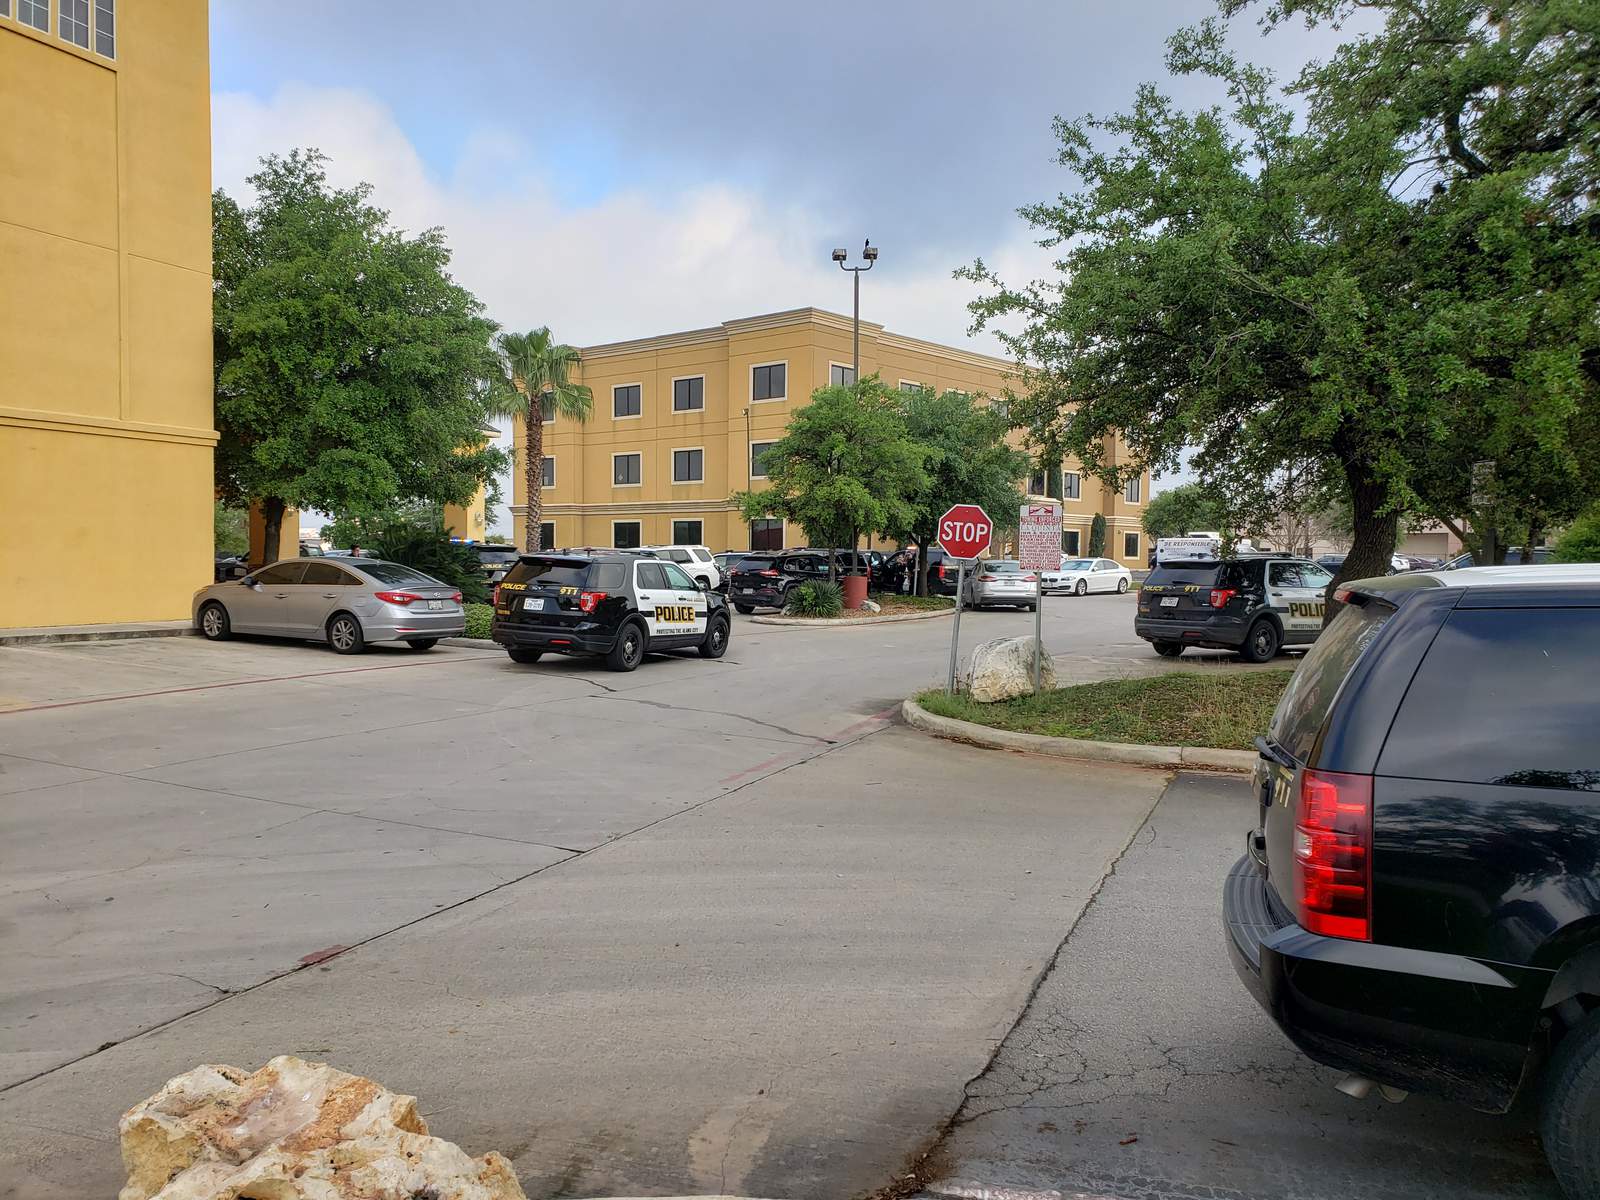 Man dies after shooting at Stone Oak hotel, woman a person of interest, police say